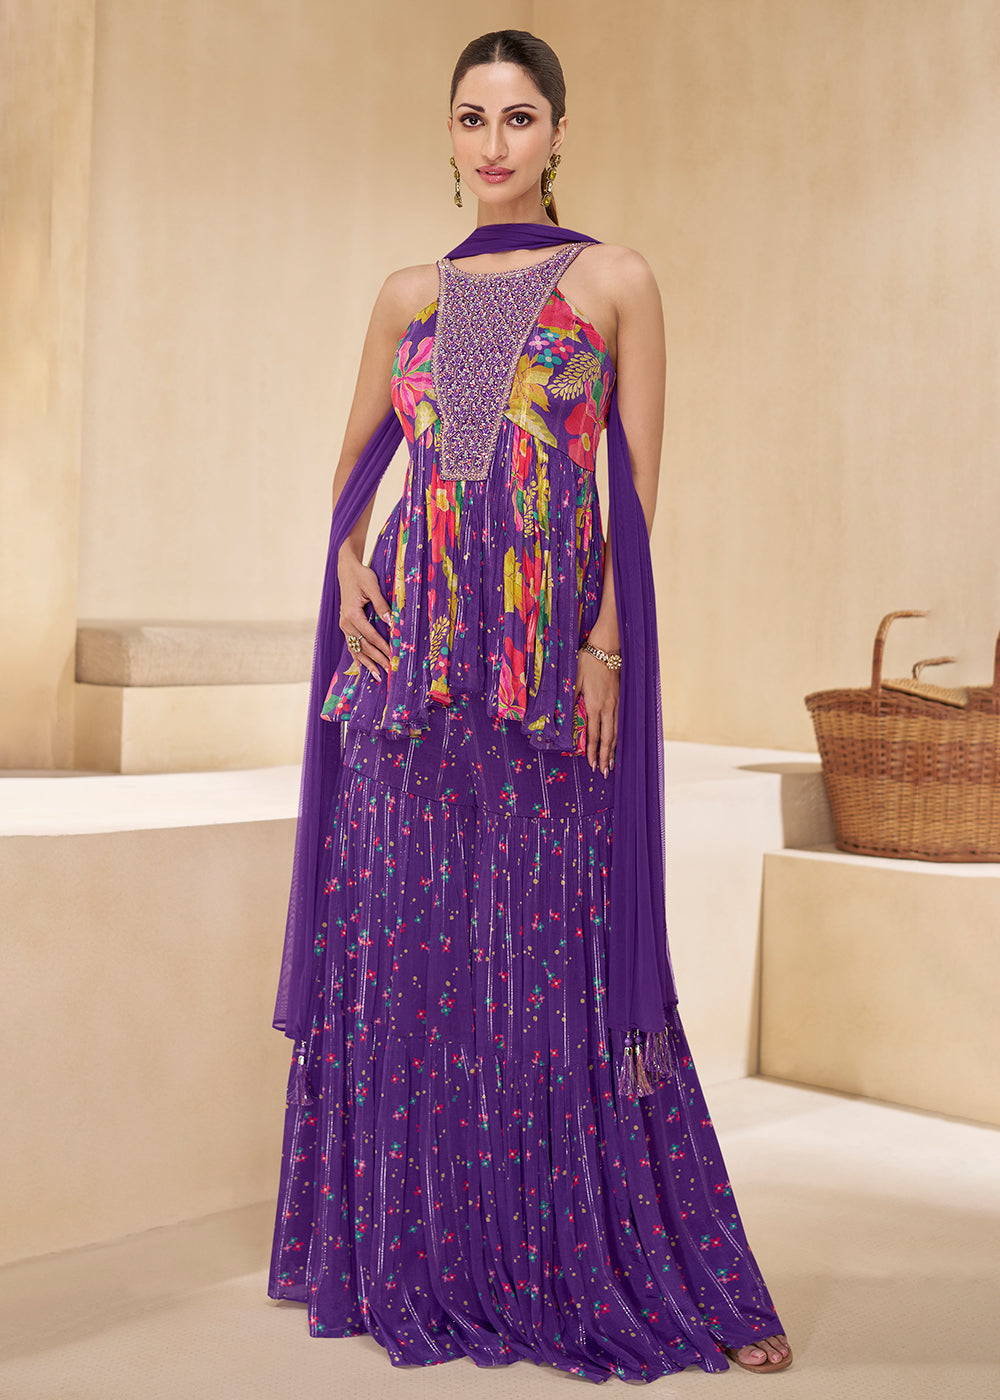 Shop Now Purple Digital Printed & Embroidered Party Style Sharara Suit Online at Empress Clothing in USA, UK, Canada, Italy & Worldwide.